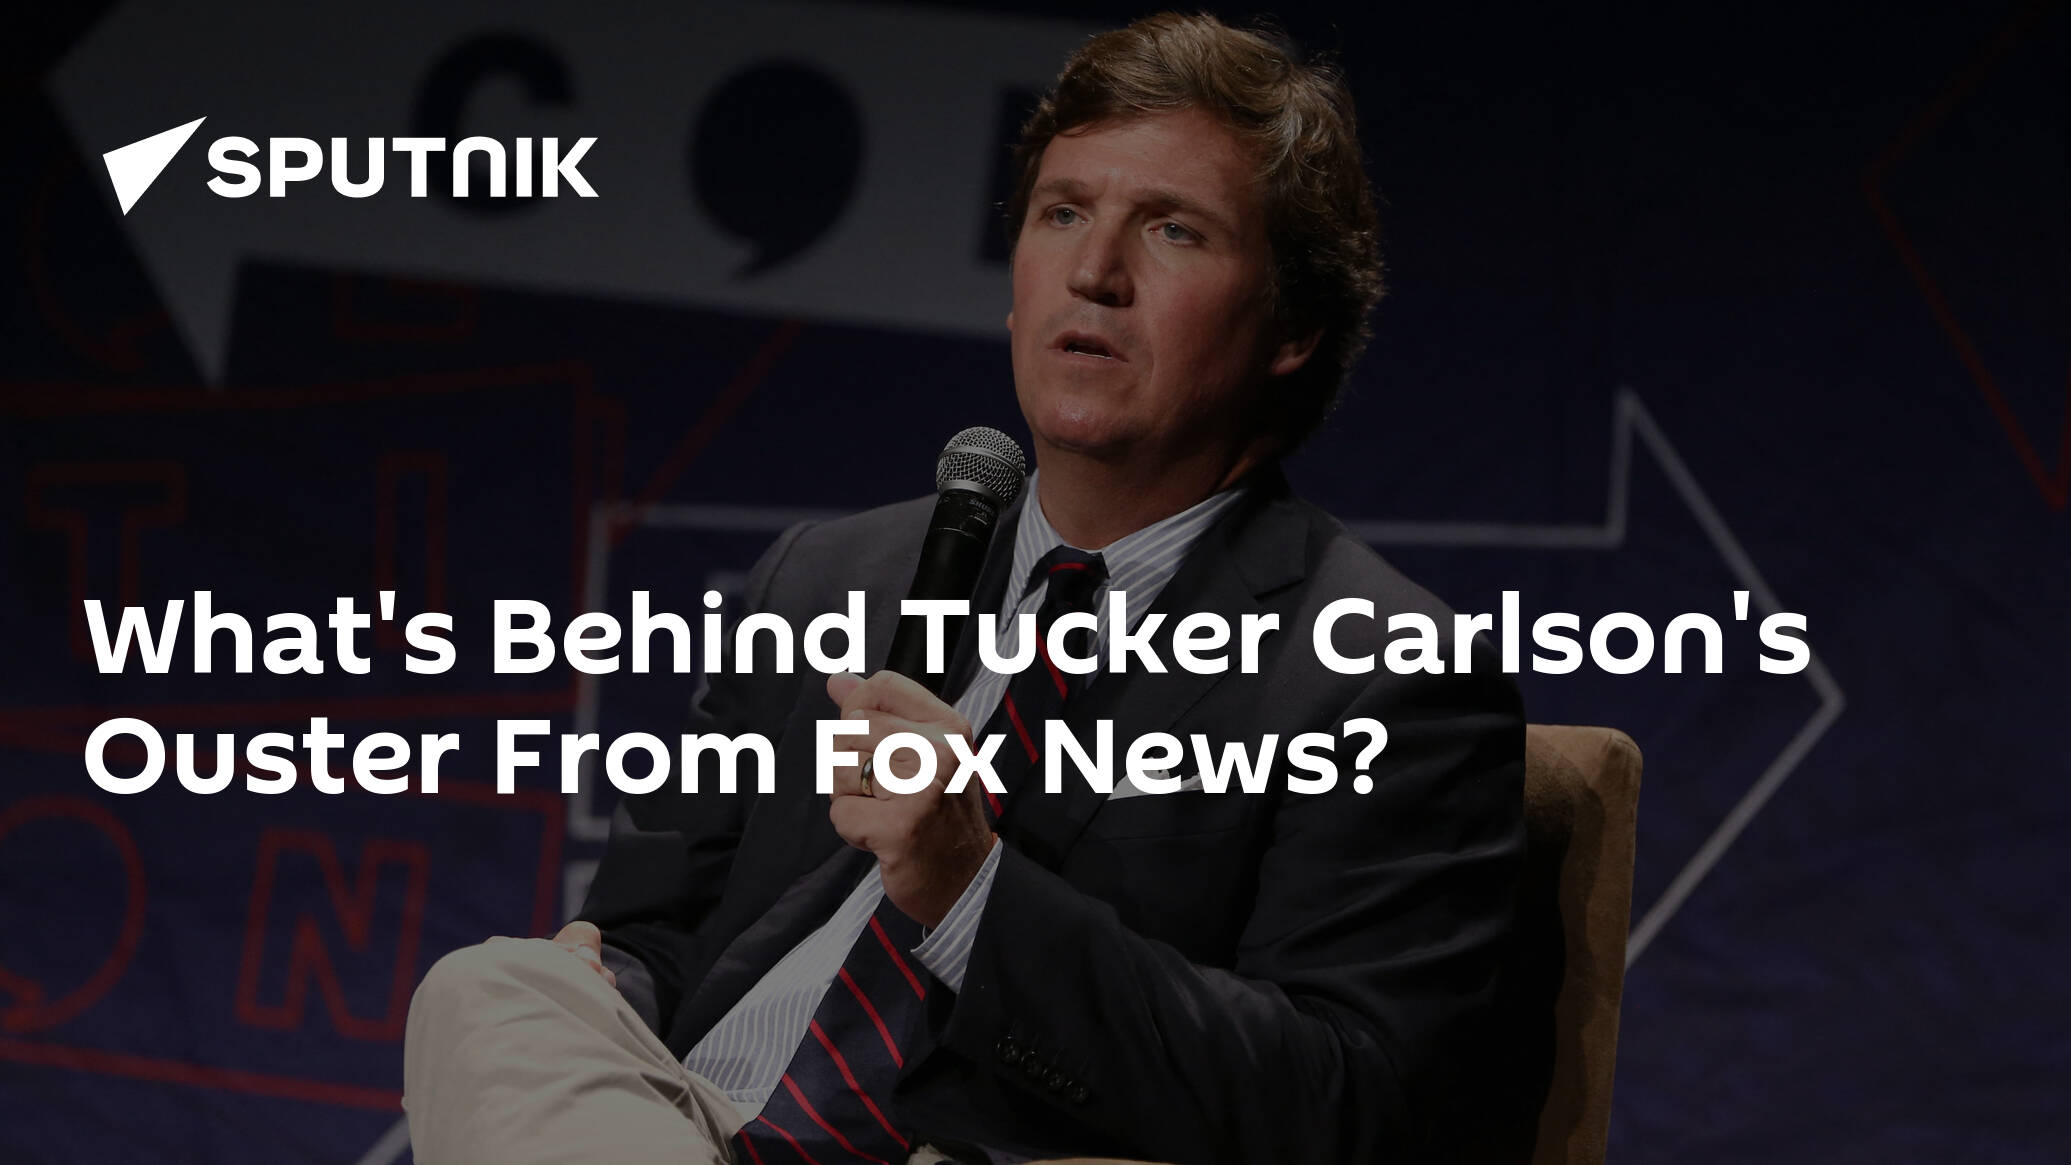 What's Behind Tucker Carlson's Ouster From Fox News?